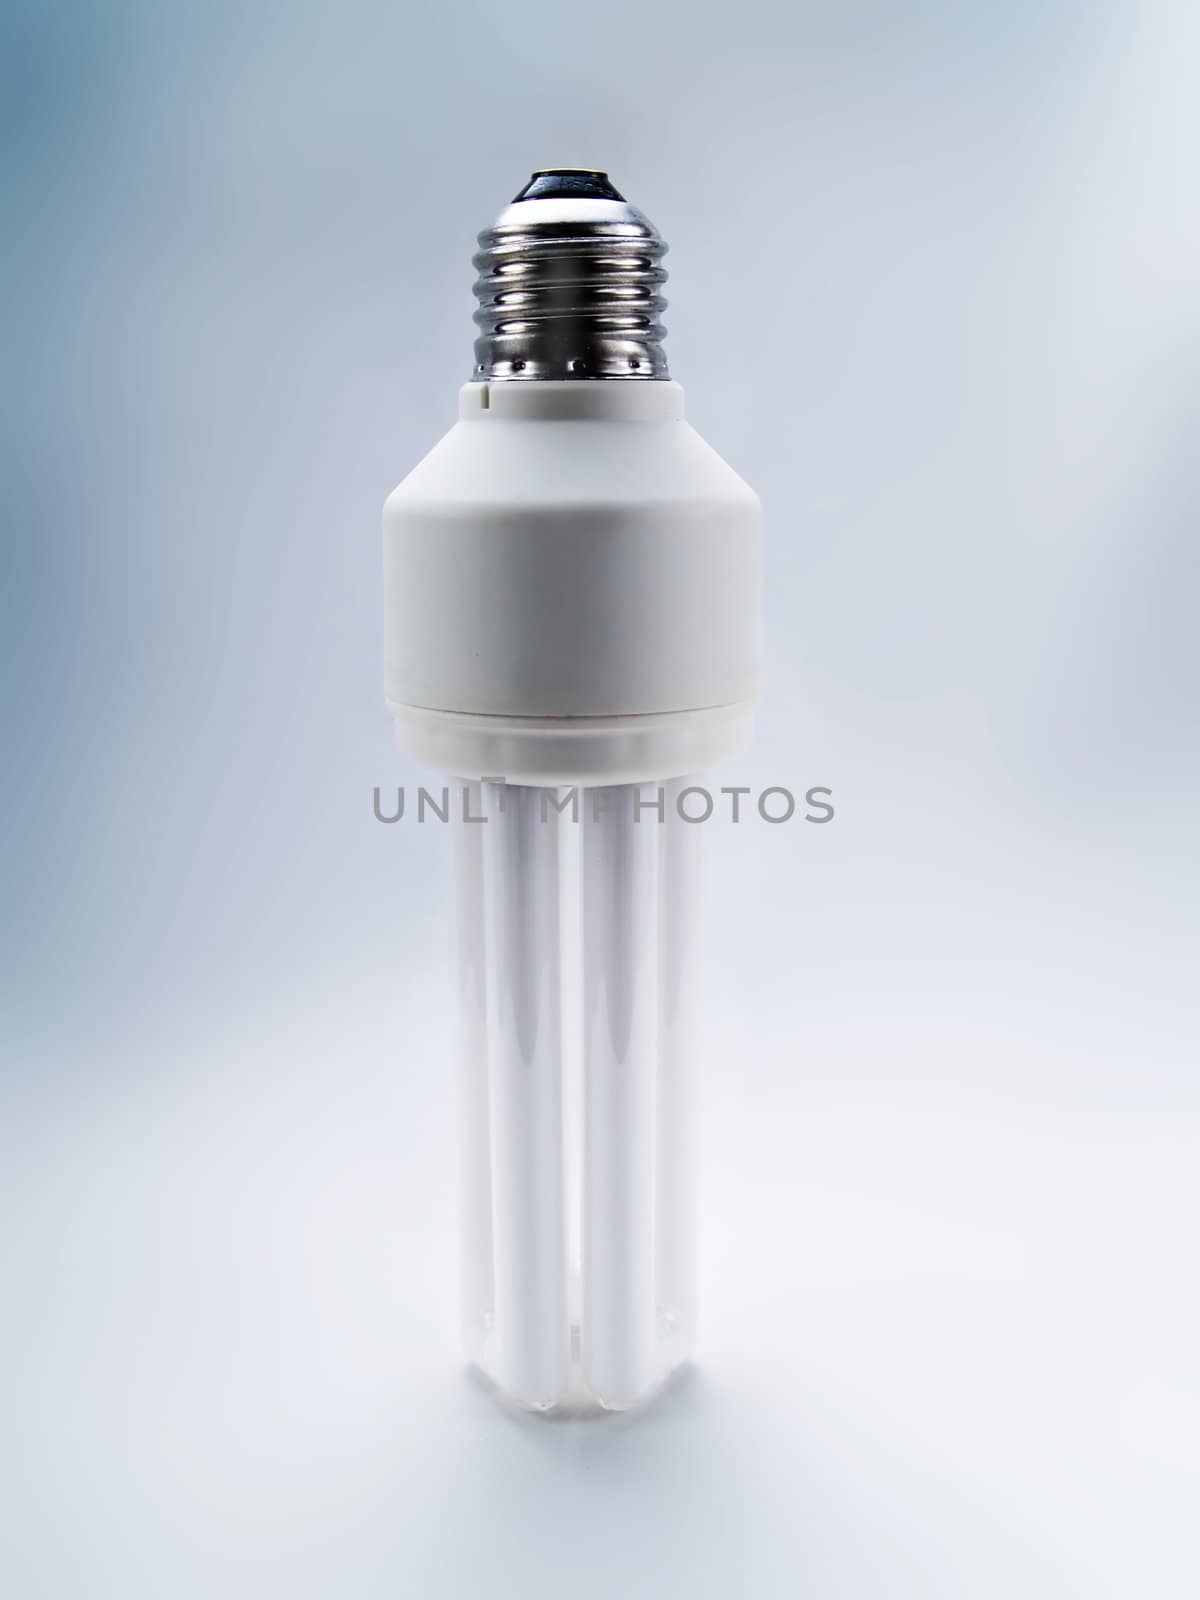 Low energy bulb by henrischmit